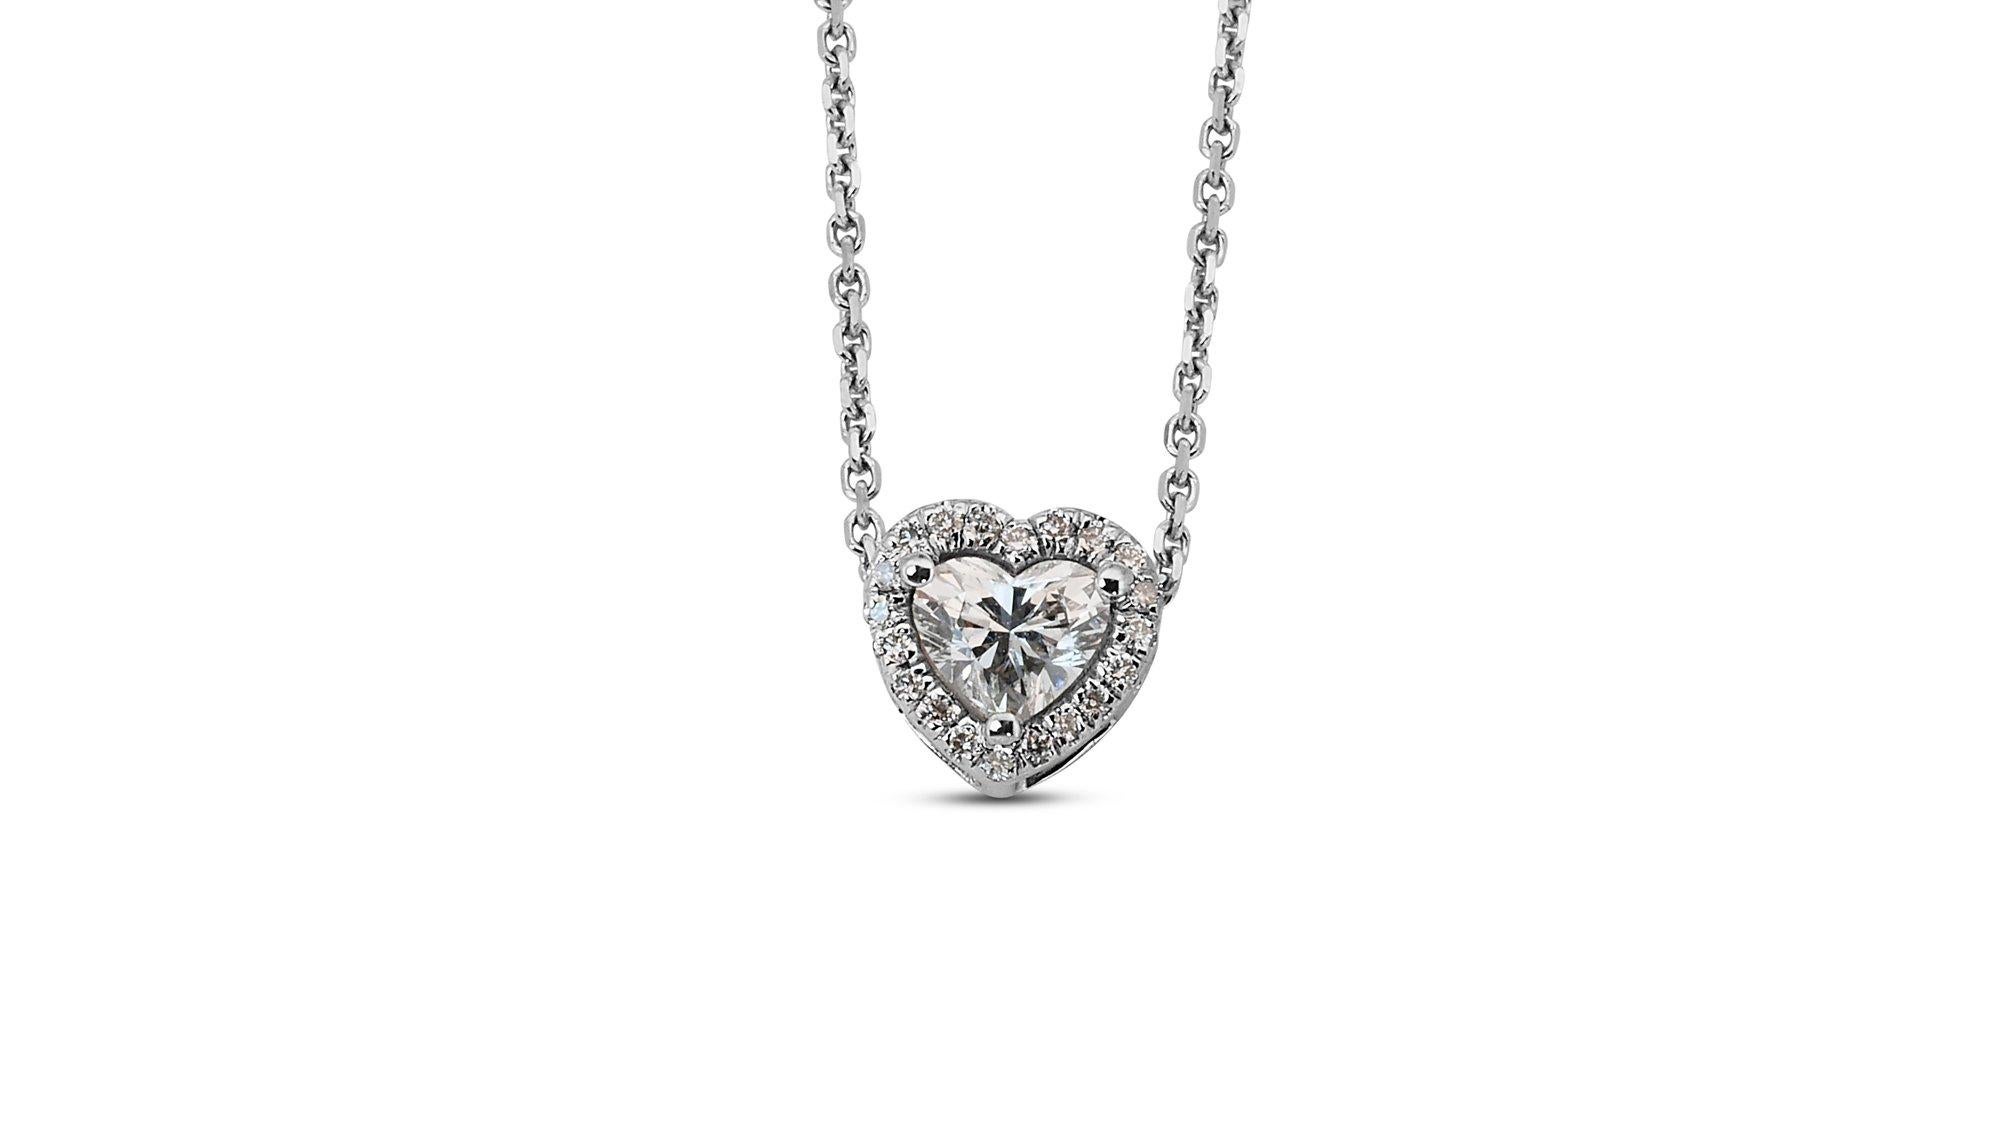 A beautiful halo heart necklace with pendant with a dazzling 0.30-carat heart shape natural diamond. It has 0.05 carat of side diamonds which add more to its elegance. The jewelry is made of 18K White Gold with a high-quality polish. It comes with a